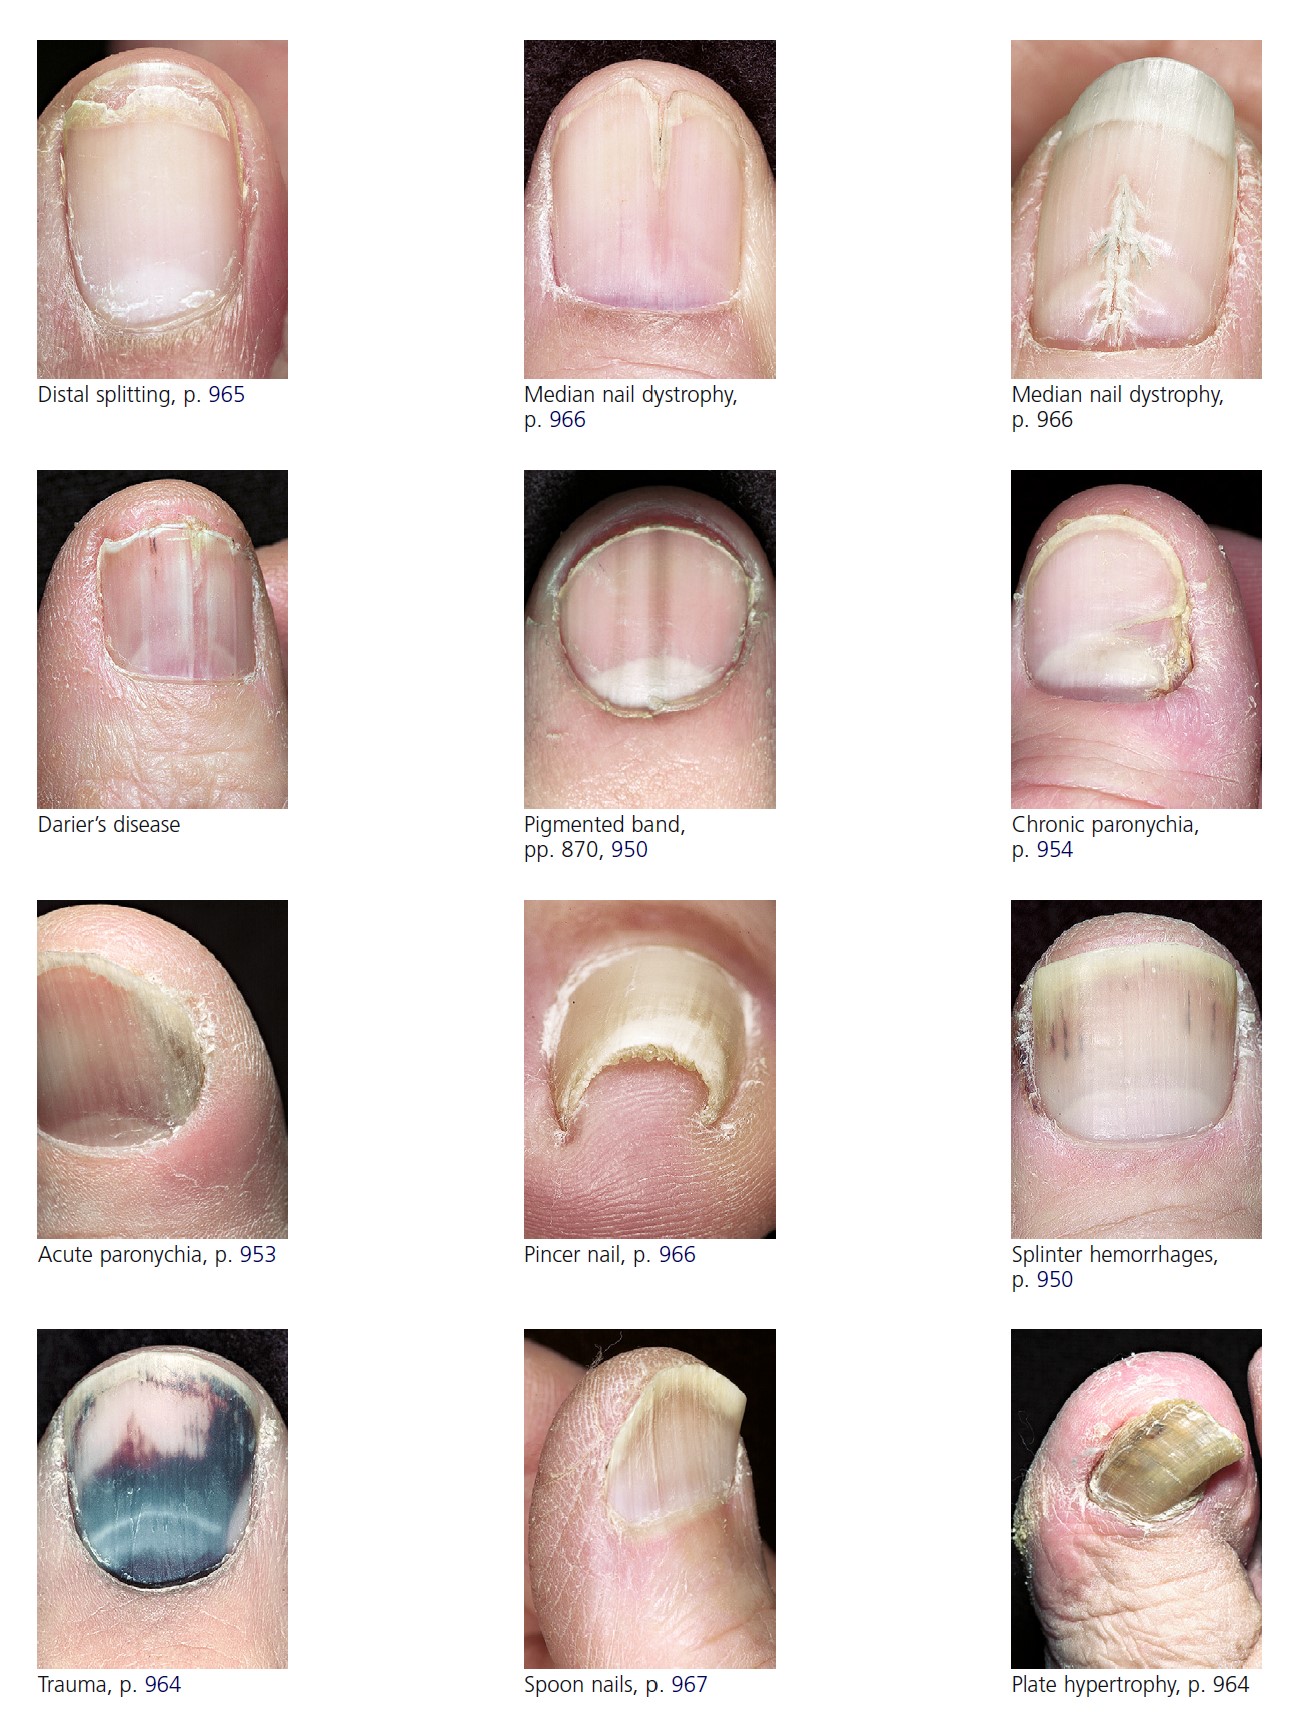 Correction of pincer nail deformity with phenol